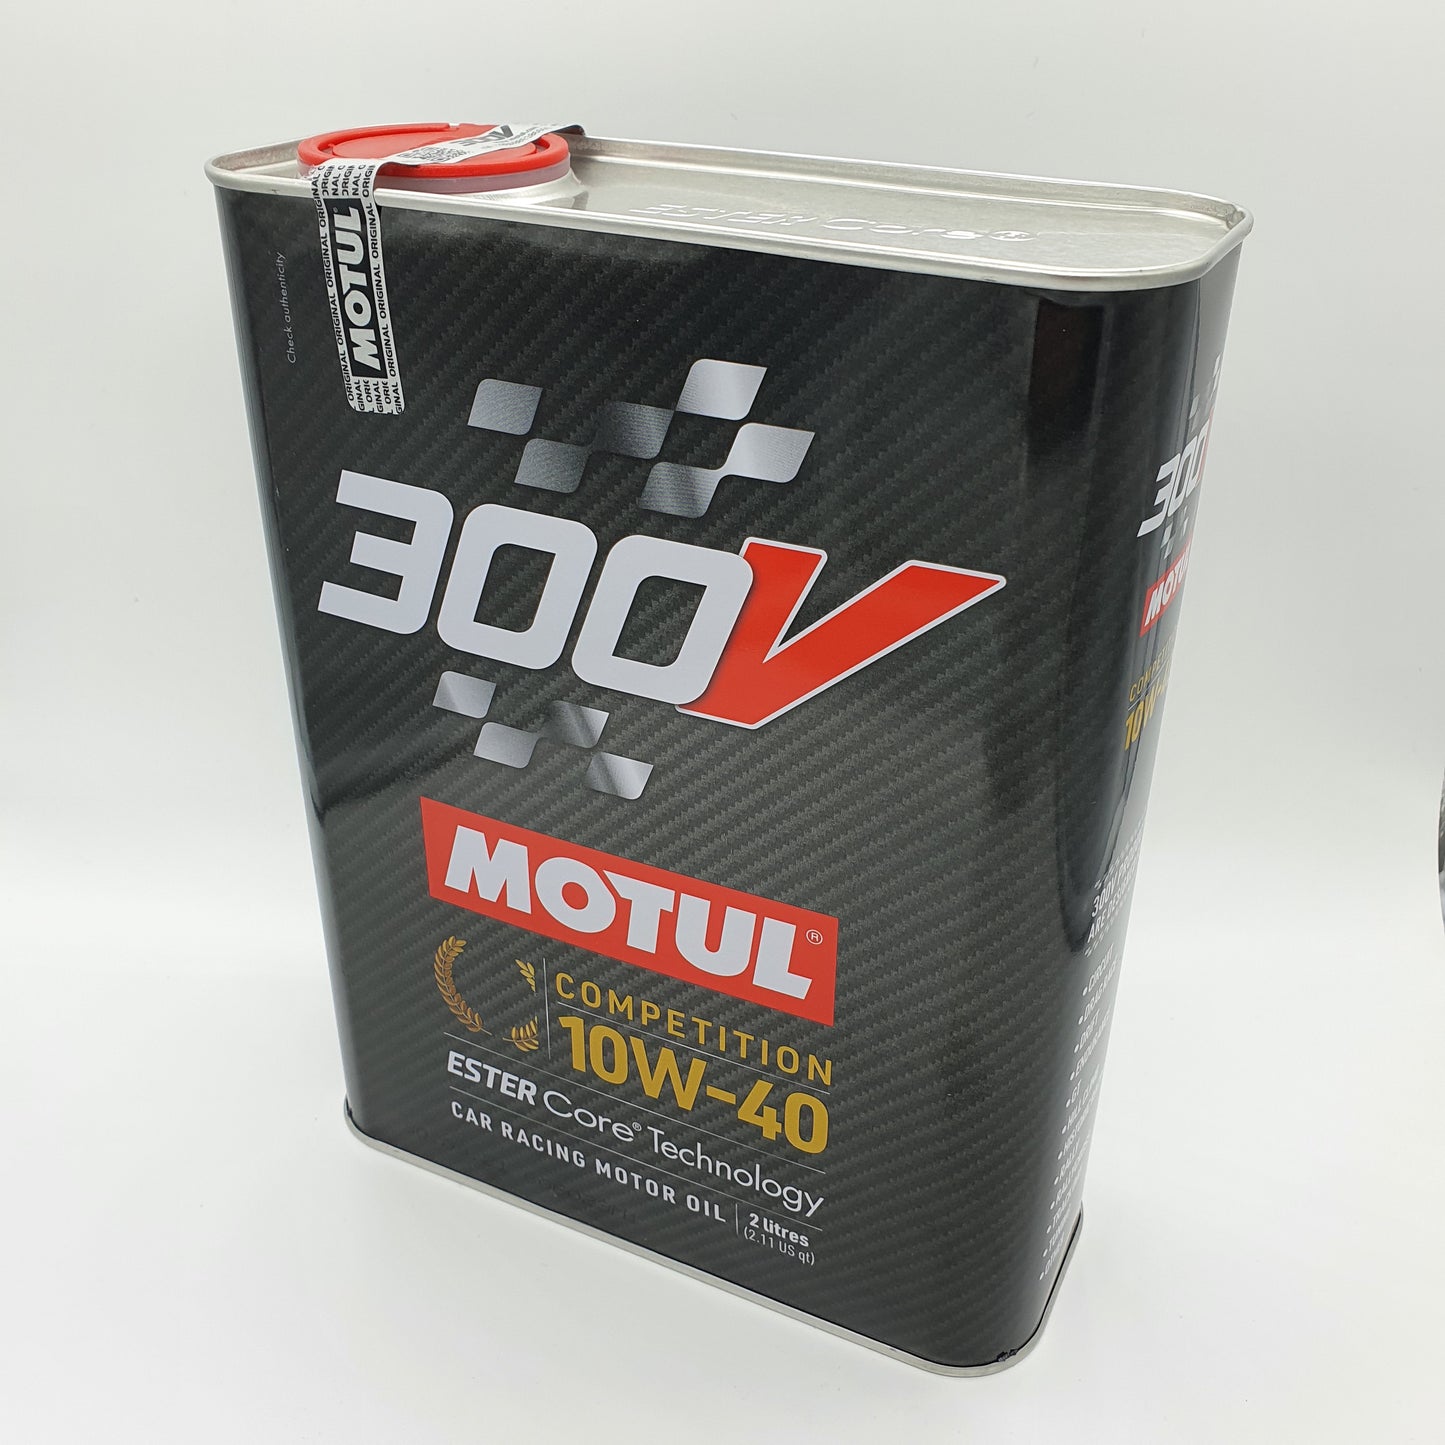 300V COMPETITION 10W-40 Motor Oil